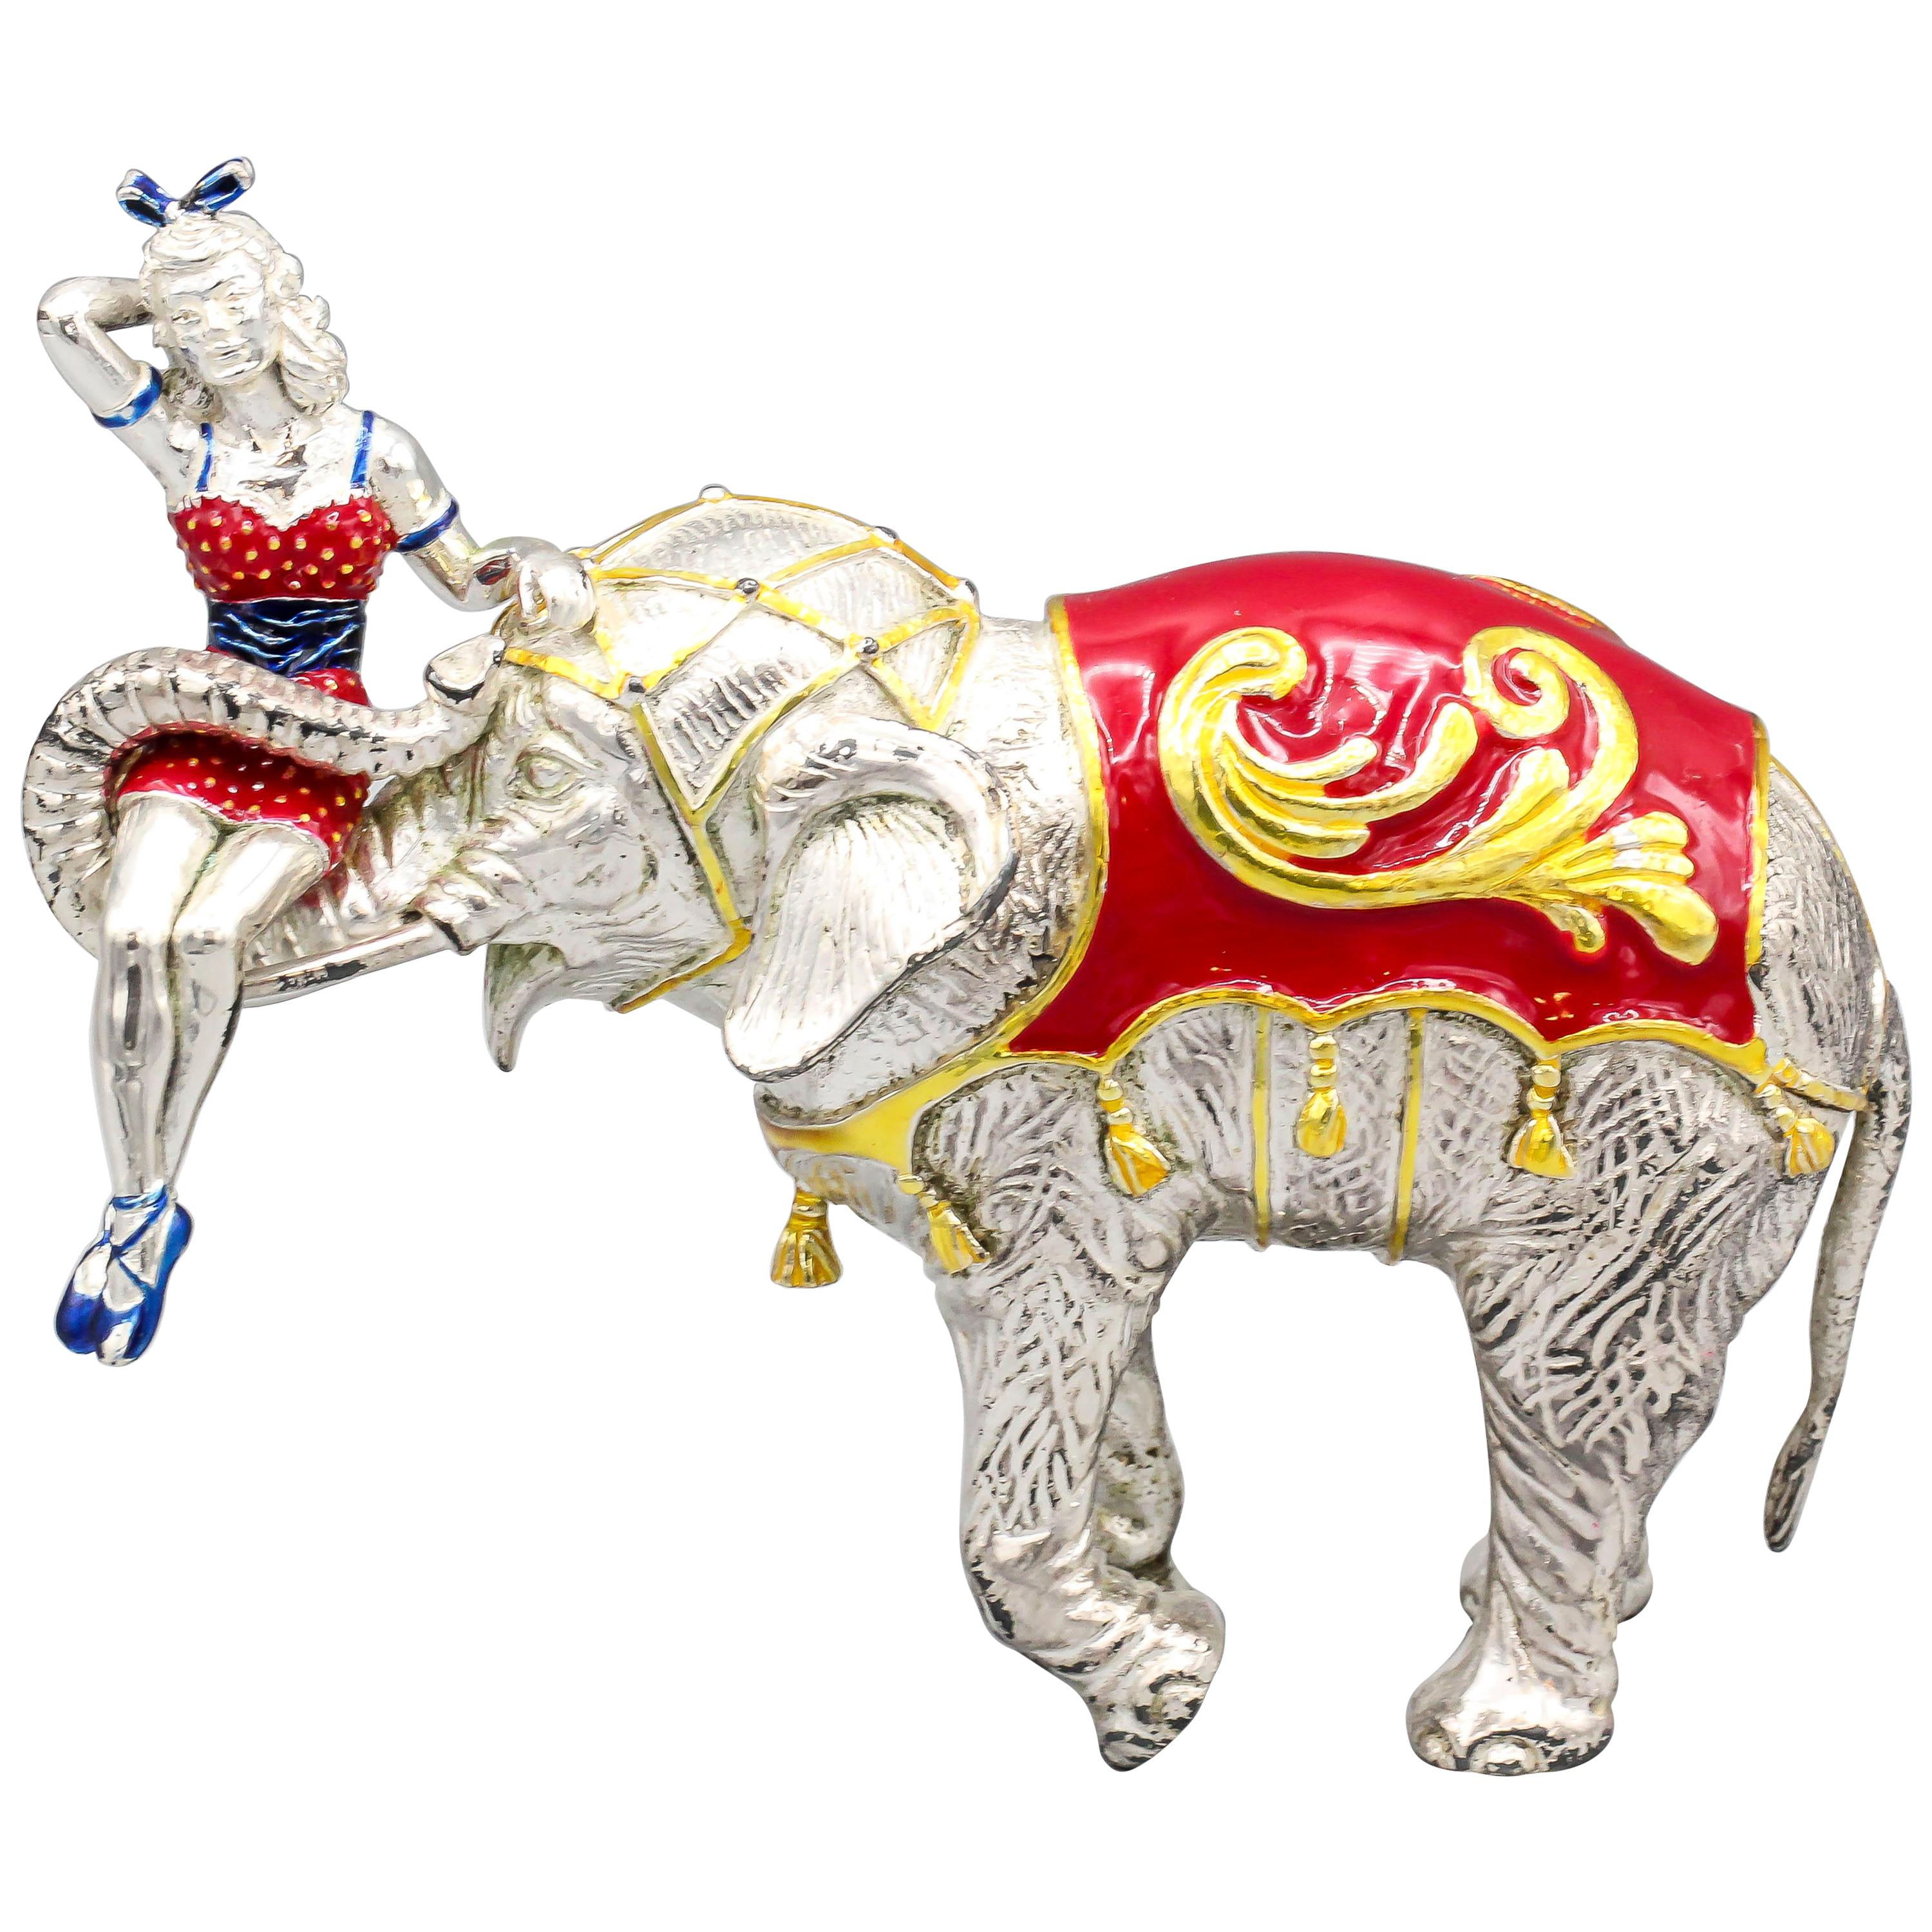 Tiffany & Co. Sterling Silver and Enamel Circus Elephant with Girl Figurine